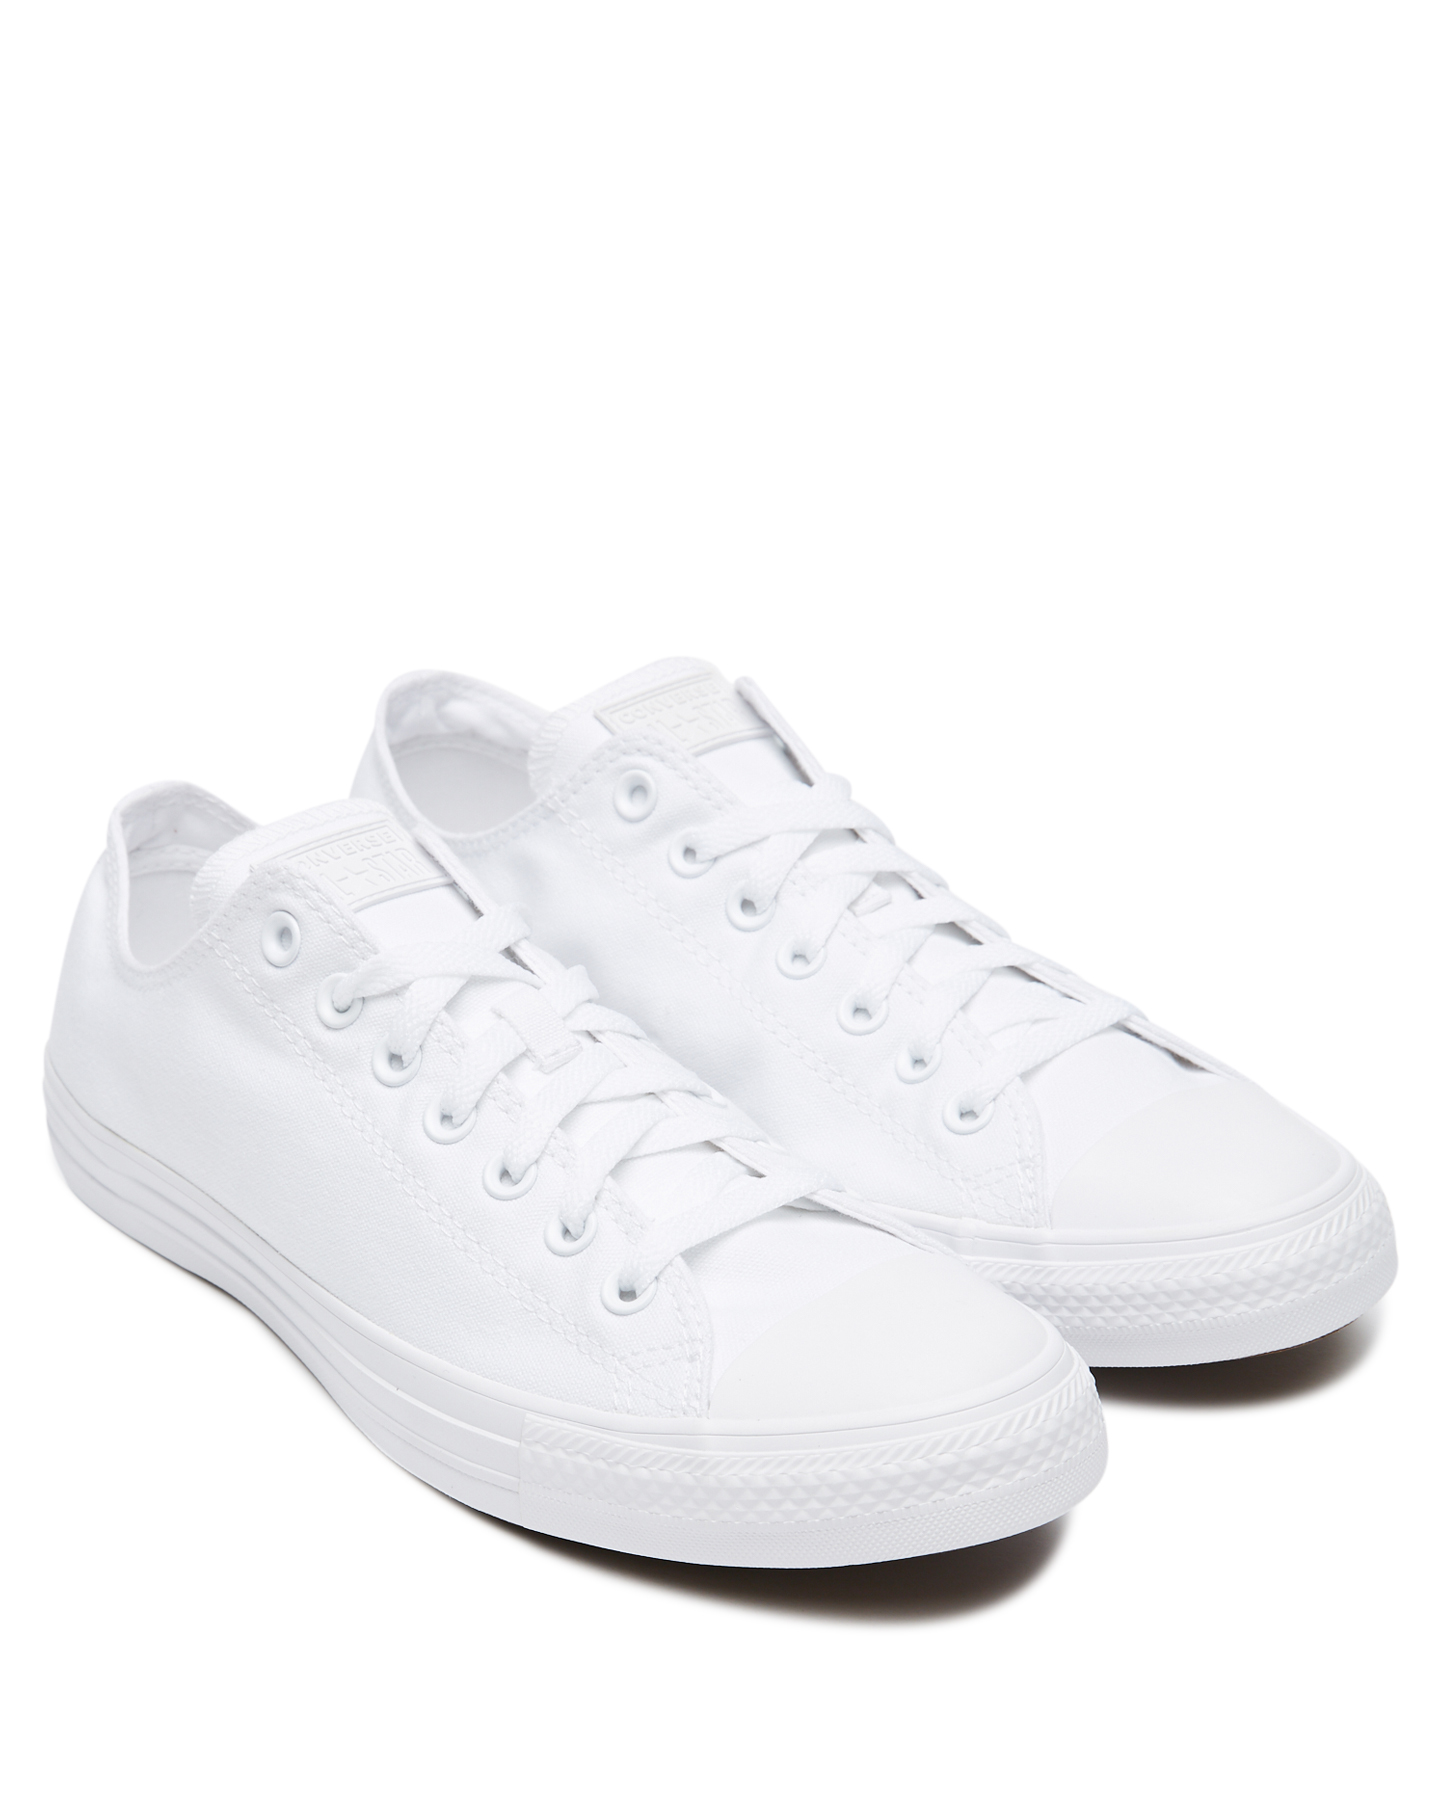 Converse Womens Chuck Taylor All Star Lo Shoe - White Monochrome |  SurfStitch